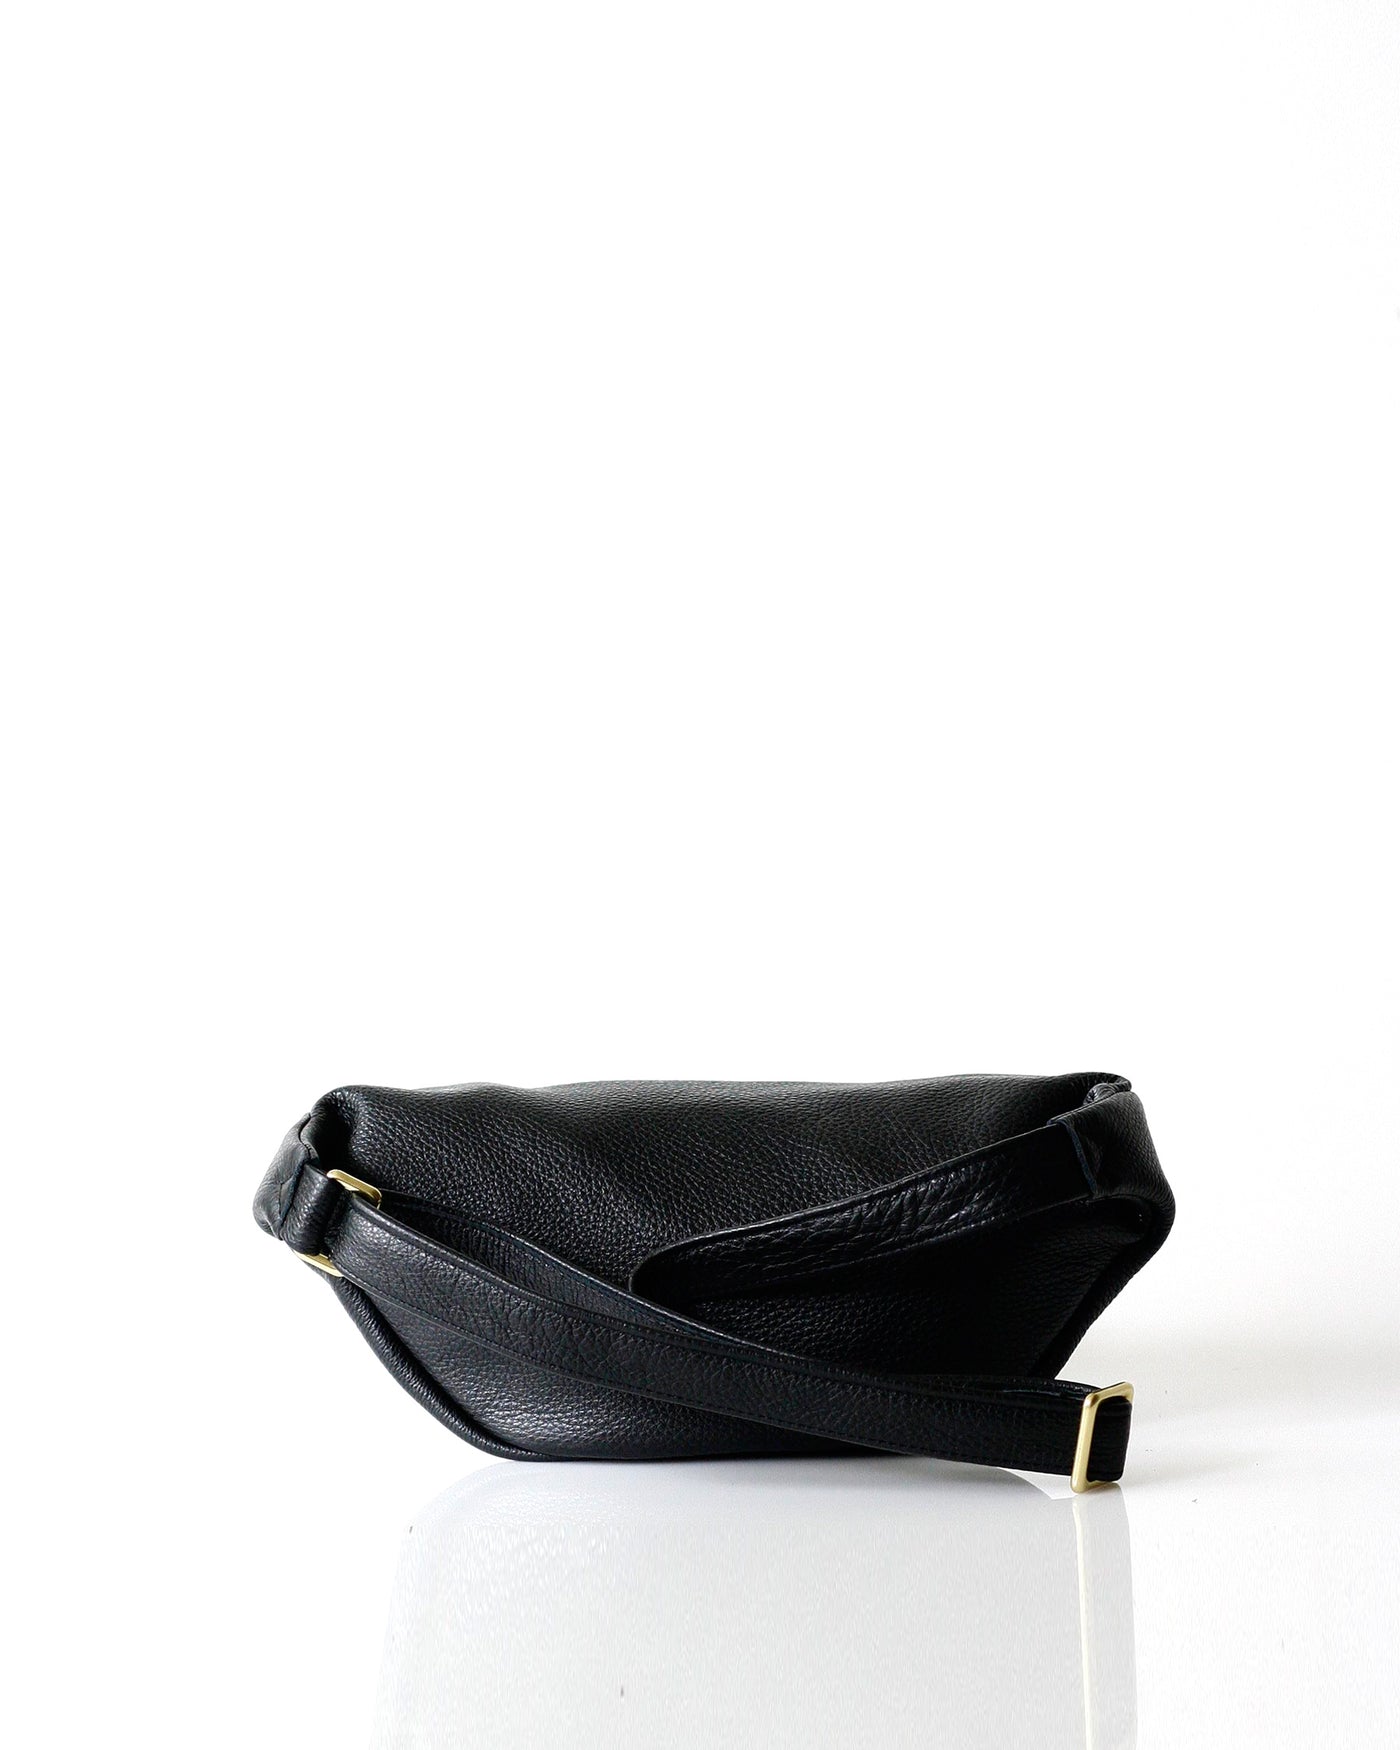 Lola Belt Bag - Opelle bag Permanent Collection - Opelle leather handbag handcrafted leather bag toronto Canada